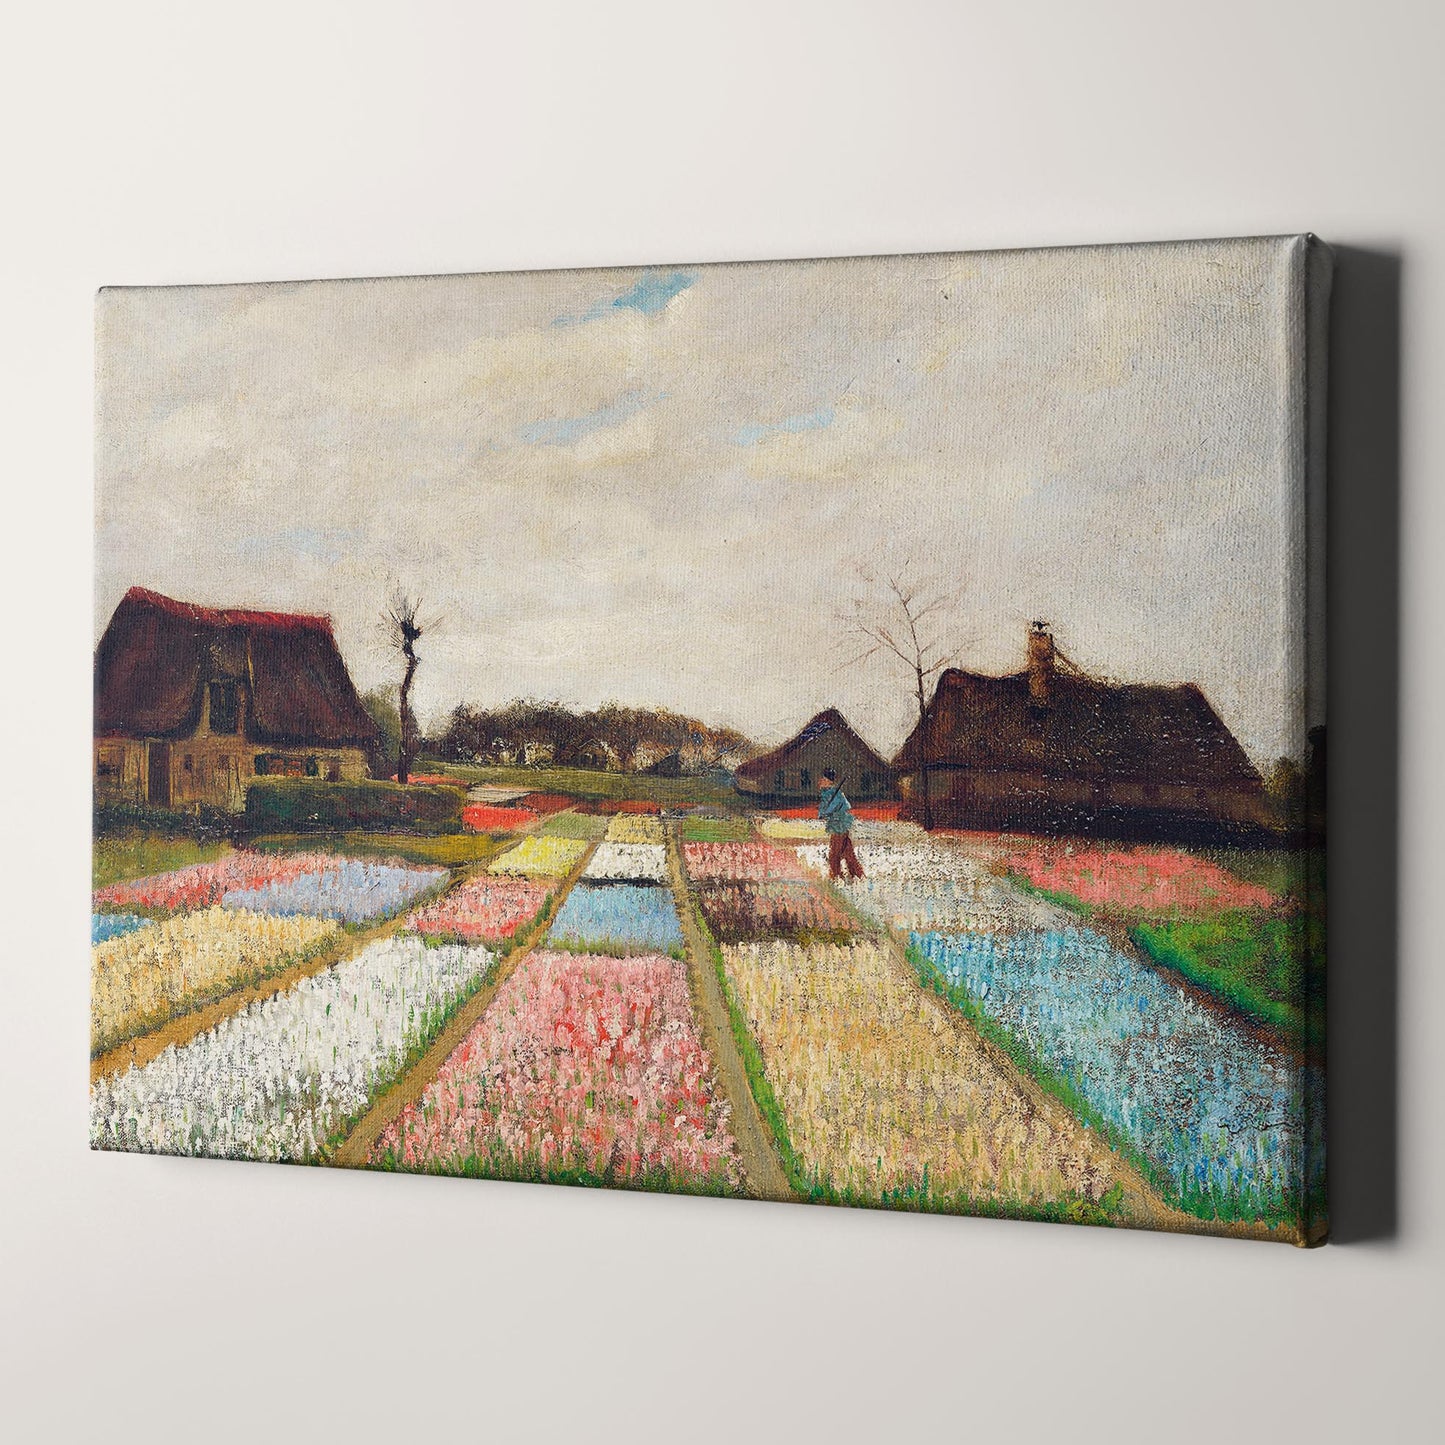 Flower Beds in Holland (1883) by Van Gogh